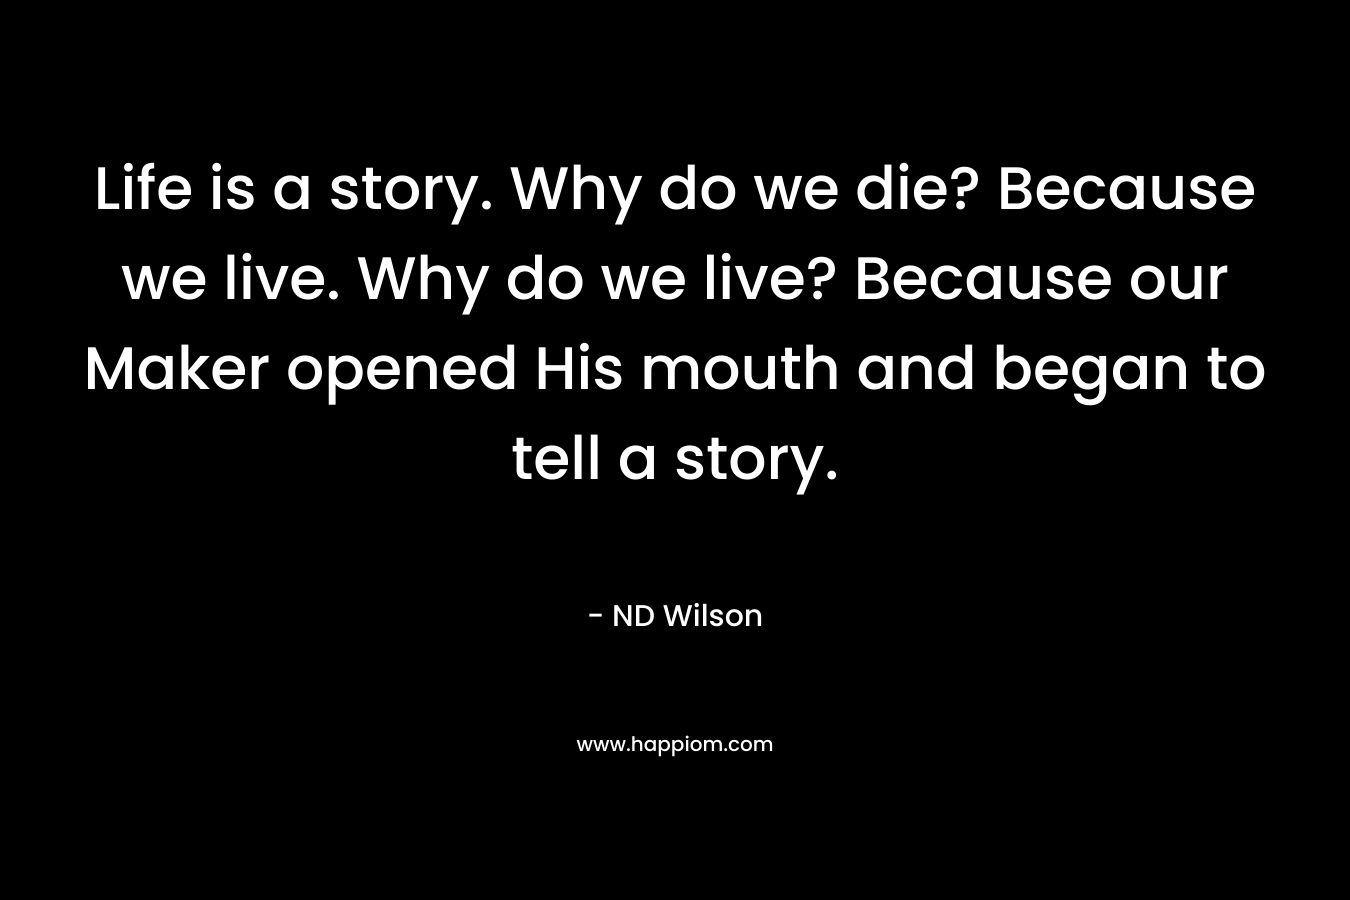 Life is a story. Why do we die? Because we live. Why do we live? Because our Maker opened His mouth and began to tell a story. – ND Wilson